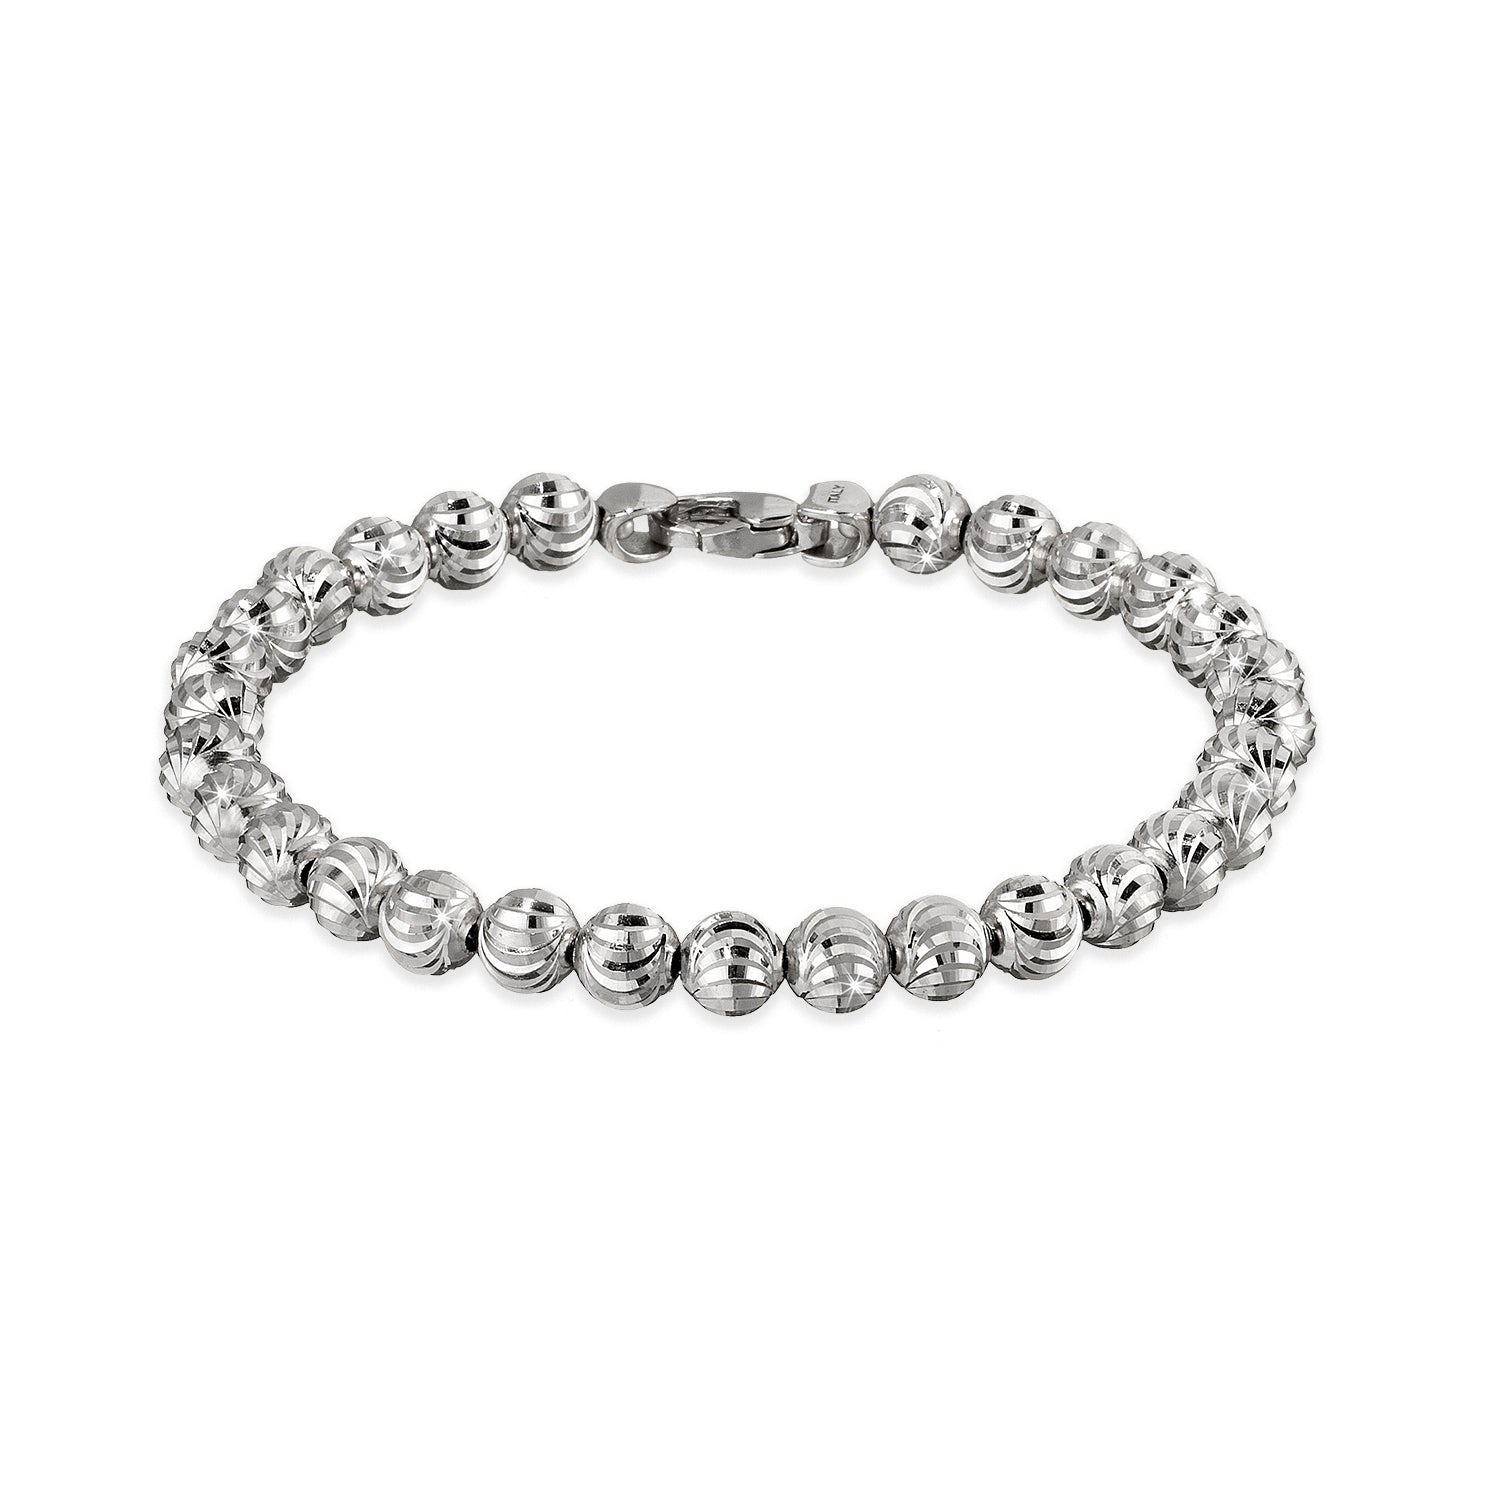 Italian collection from Officina Bernardi  High precision diamond cut 3.00 mm bead  Rhodium coated   Secured lobster clasp